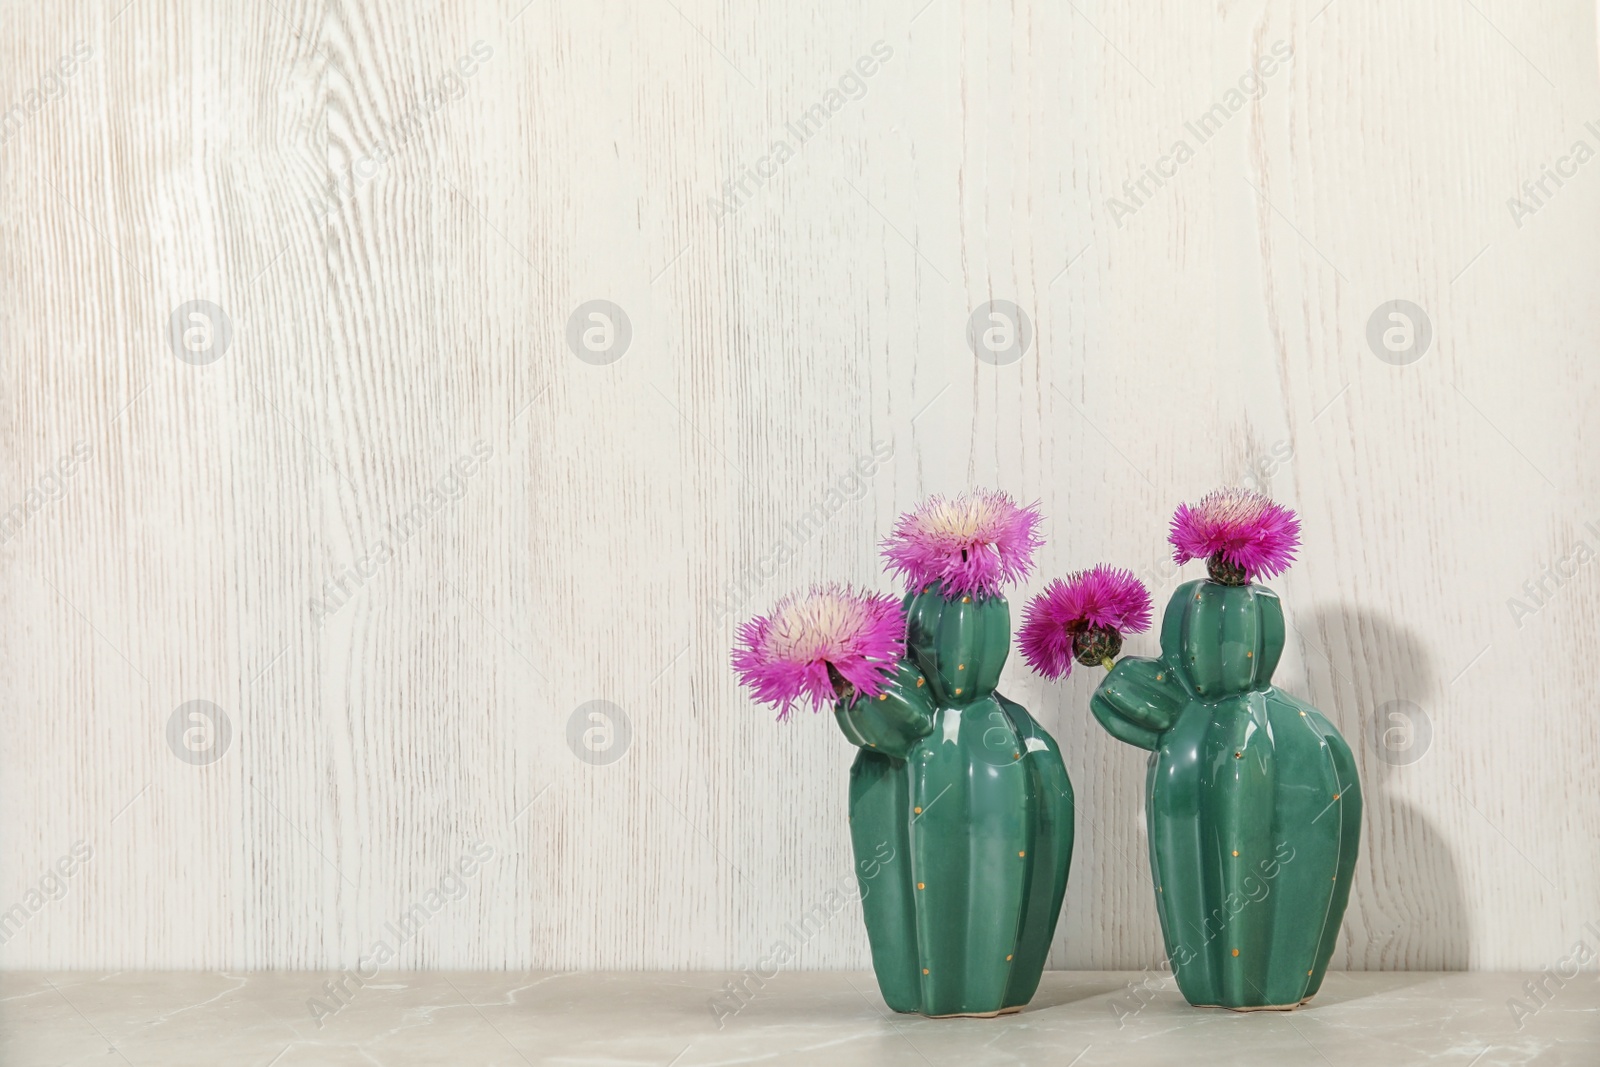 Photo of Trendy cactus shaped ceramic vases with flowers on table against wooden background